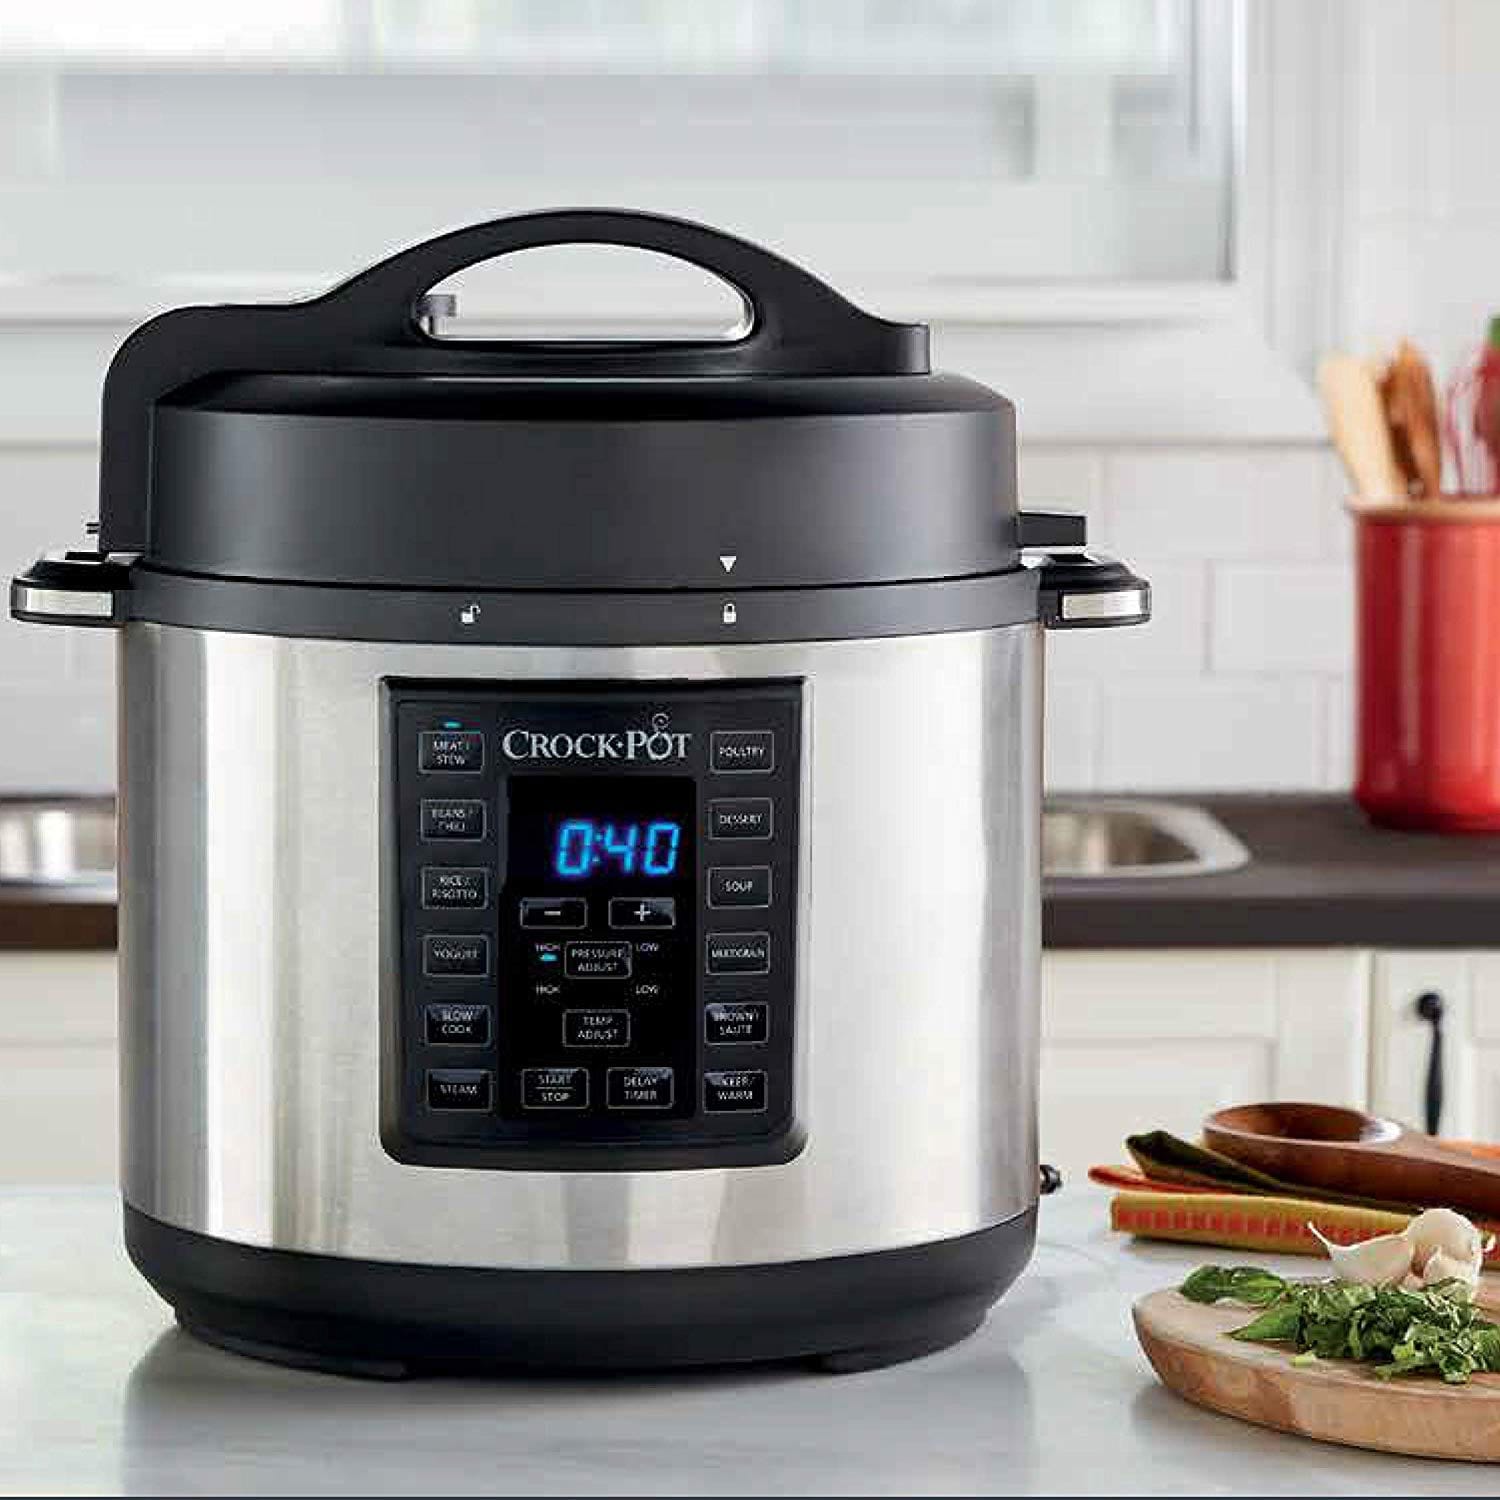 https://ak1.ostkcdn.com/images/products/is/images/direct/ab1c5e300e65f03bea2402b3d1866ec75205e604/Crock-Pot-8-In-1-Multi-Use-Express-Cooker%2C-Silver-Black%2C-6-Quarts.jpg